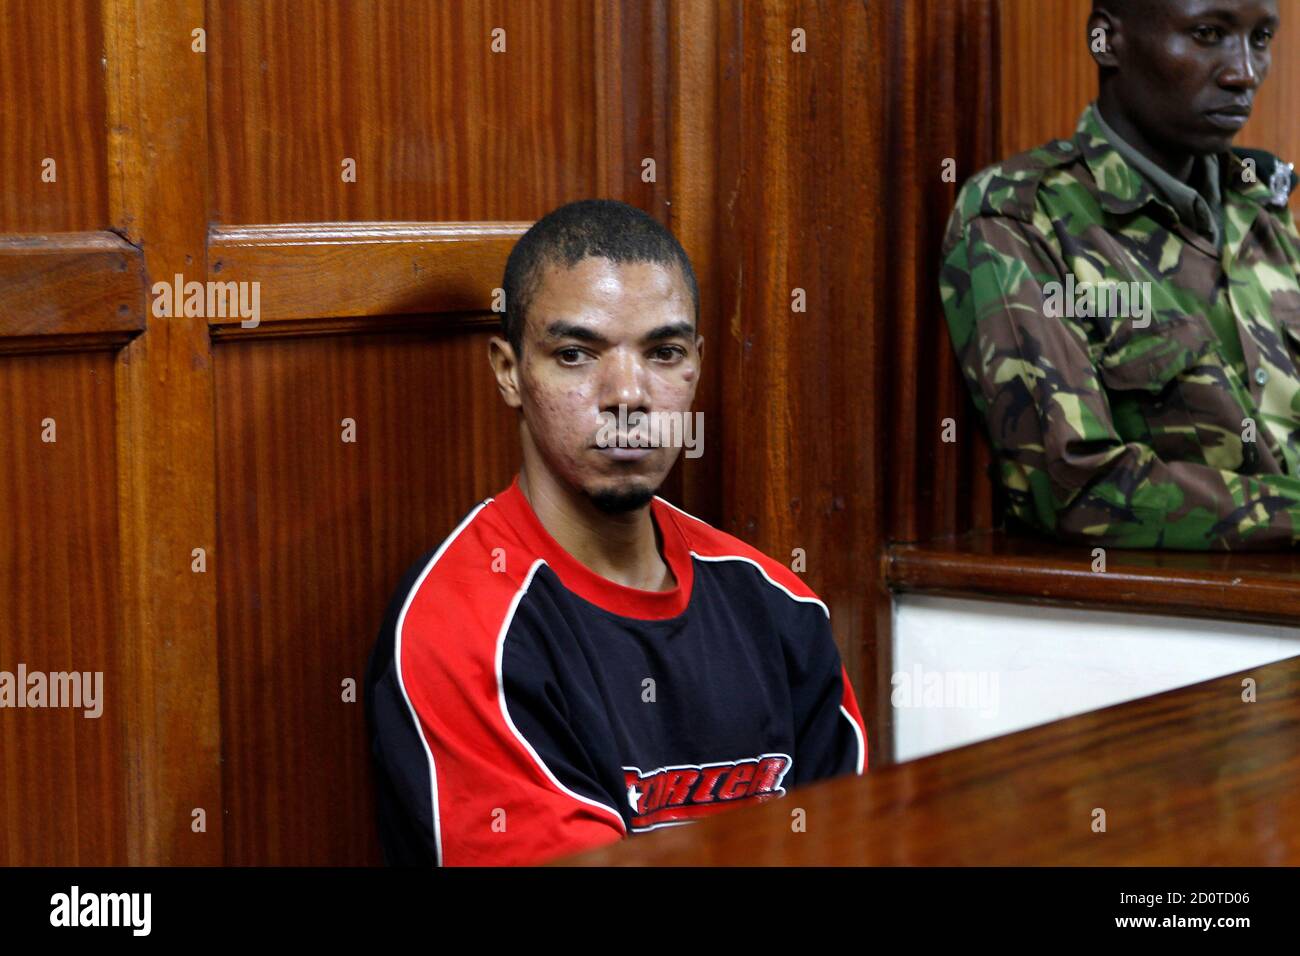 Jermaine Grant, a British citizen, sits inside the dock at the Milimani High Court in Kenya's capital Nairobi March 7, 2012. The trial against a Briton accused of Islamist extremist ties charged with five counts of robbery with violence and escaping from lawful custody started its hearing at the Kenya's High court in Nairobi. Evidence stated that at the time of his arrest four years ago, he was clad in Islamic dress normally worn by women. REUTERS/Thomas Mukoya (KENYA - Tags: CRIME LAW) Stock Photo